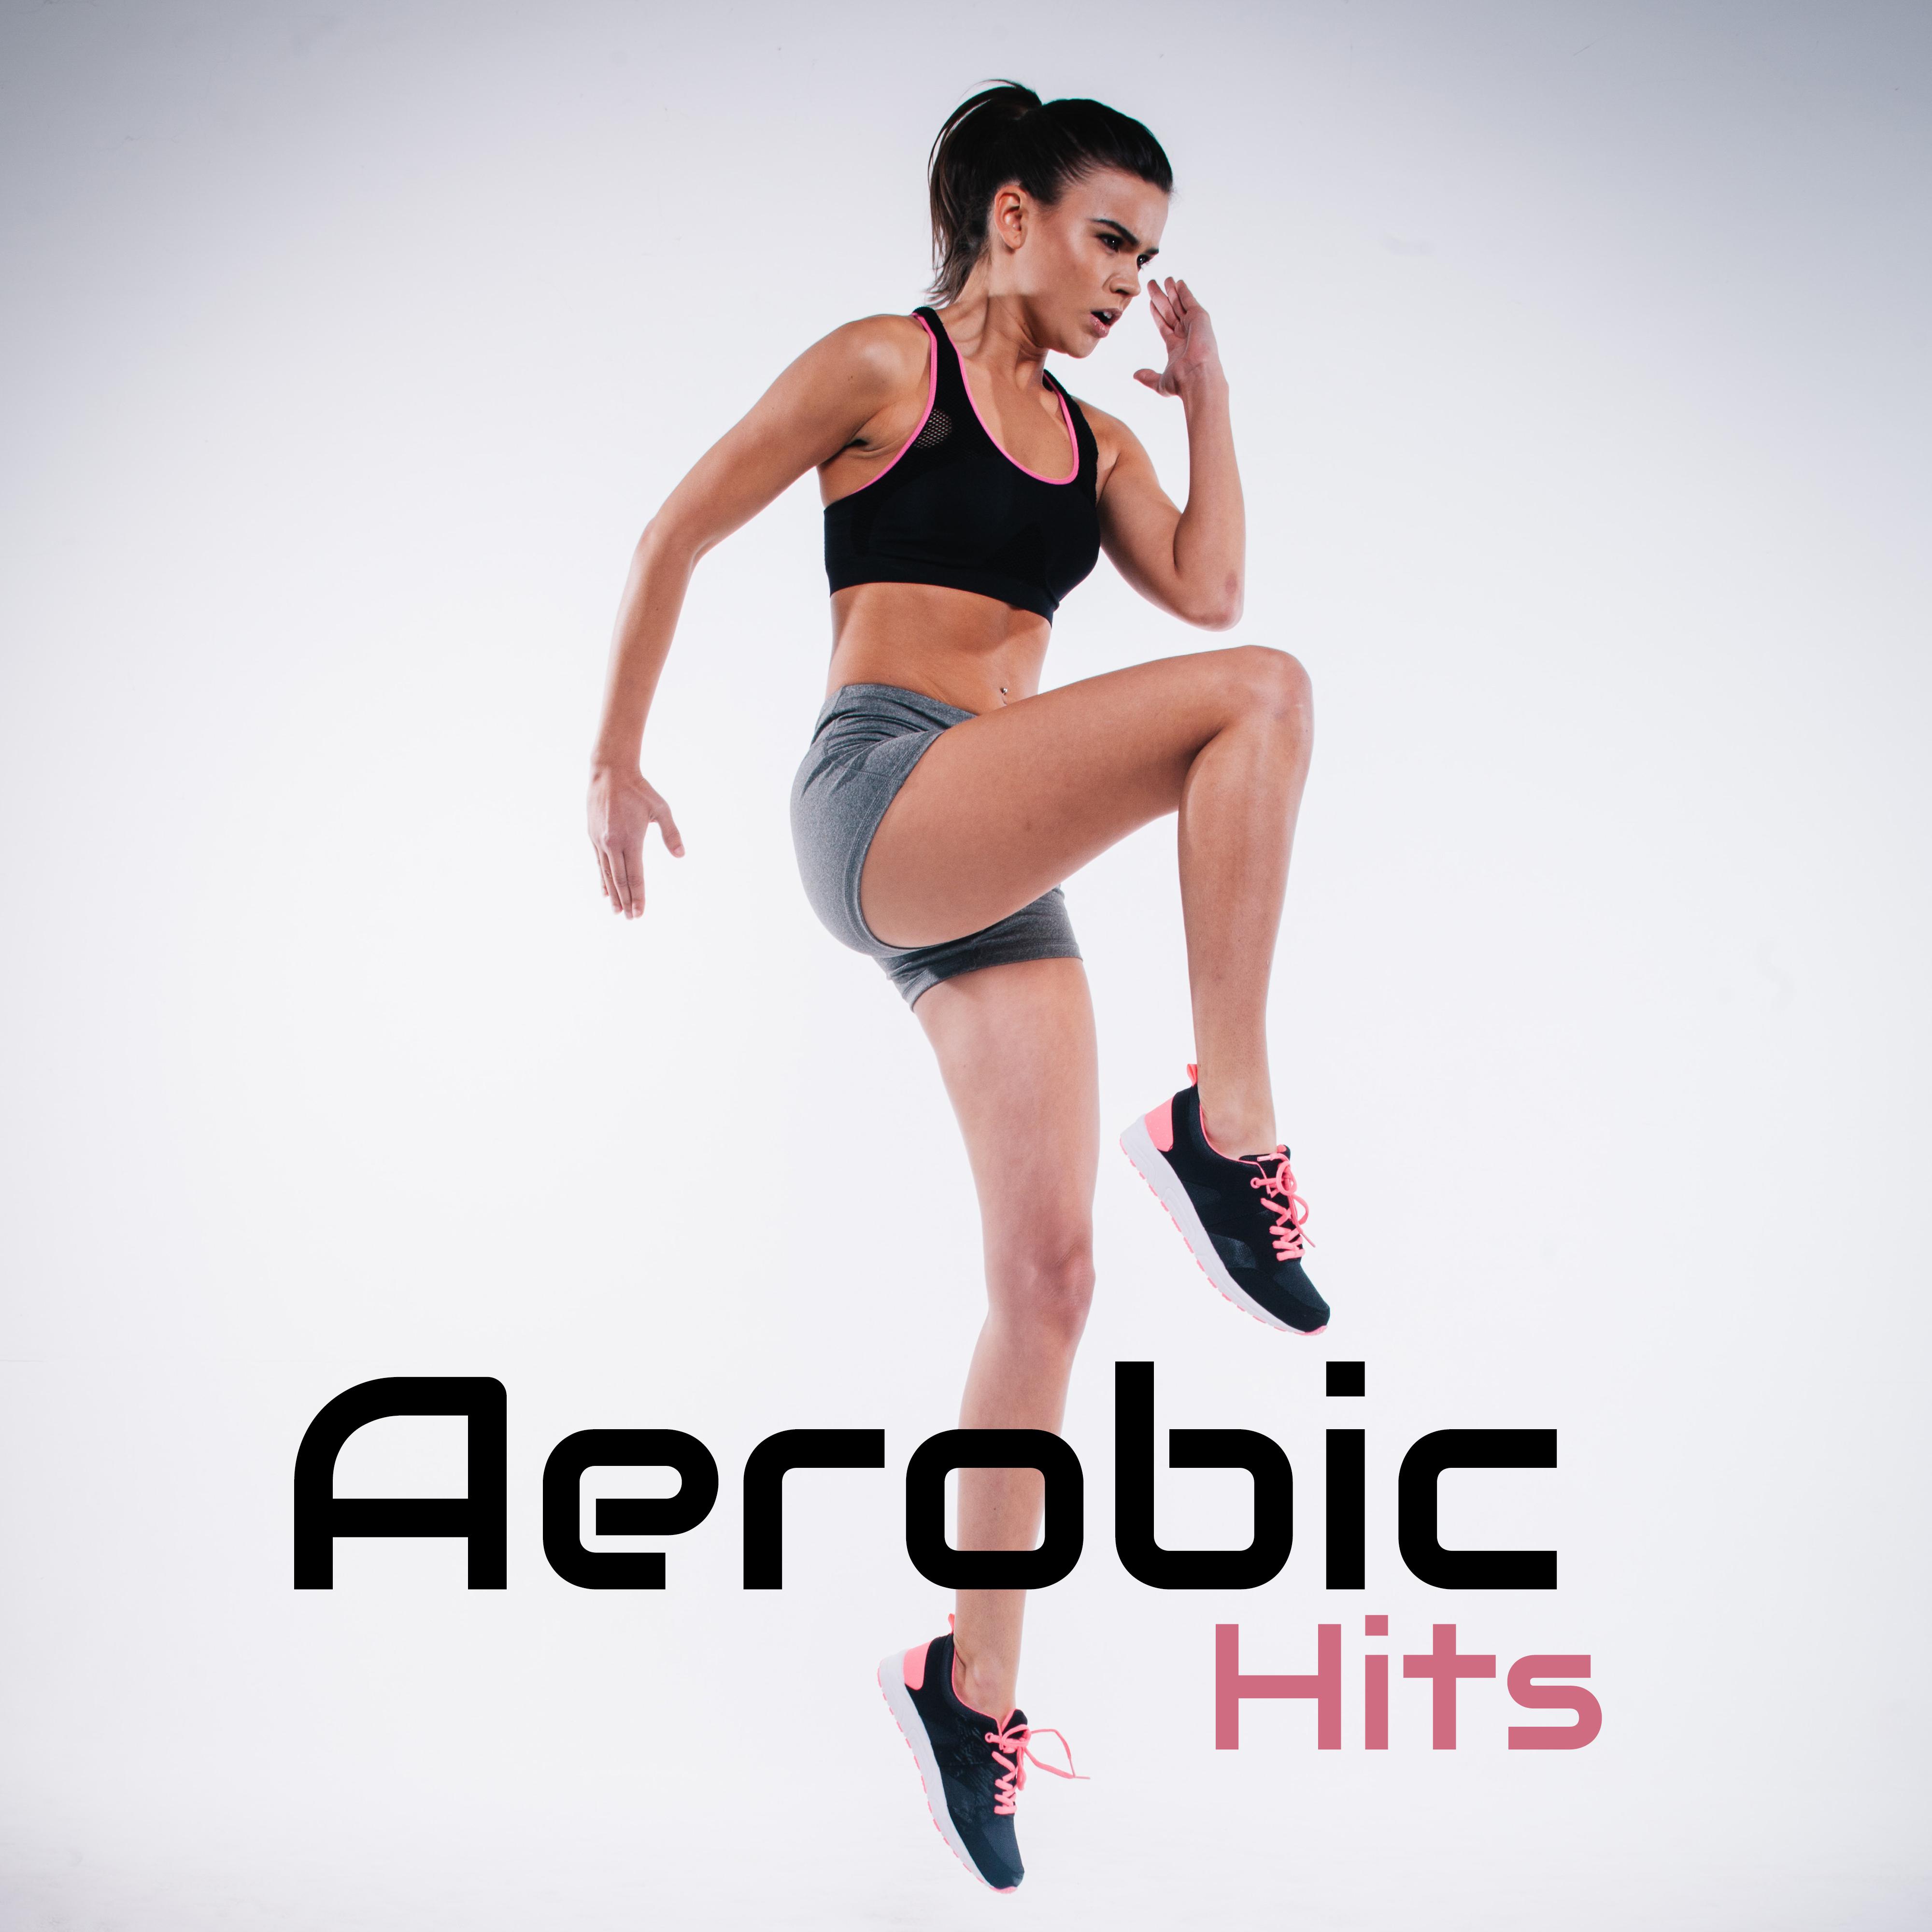 Aerobic Hits  Workout Music 2019, Deep Chill Out, Running Music, Stress Relief, Music for Training